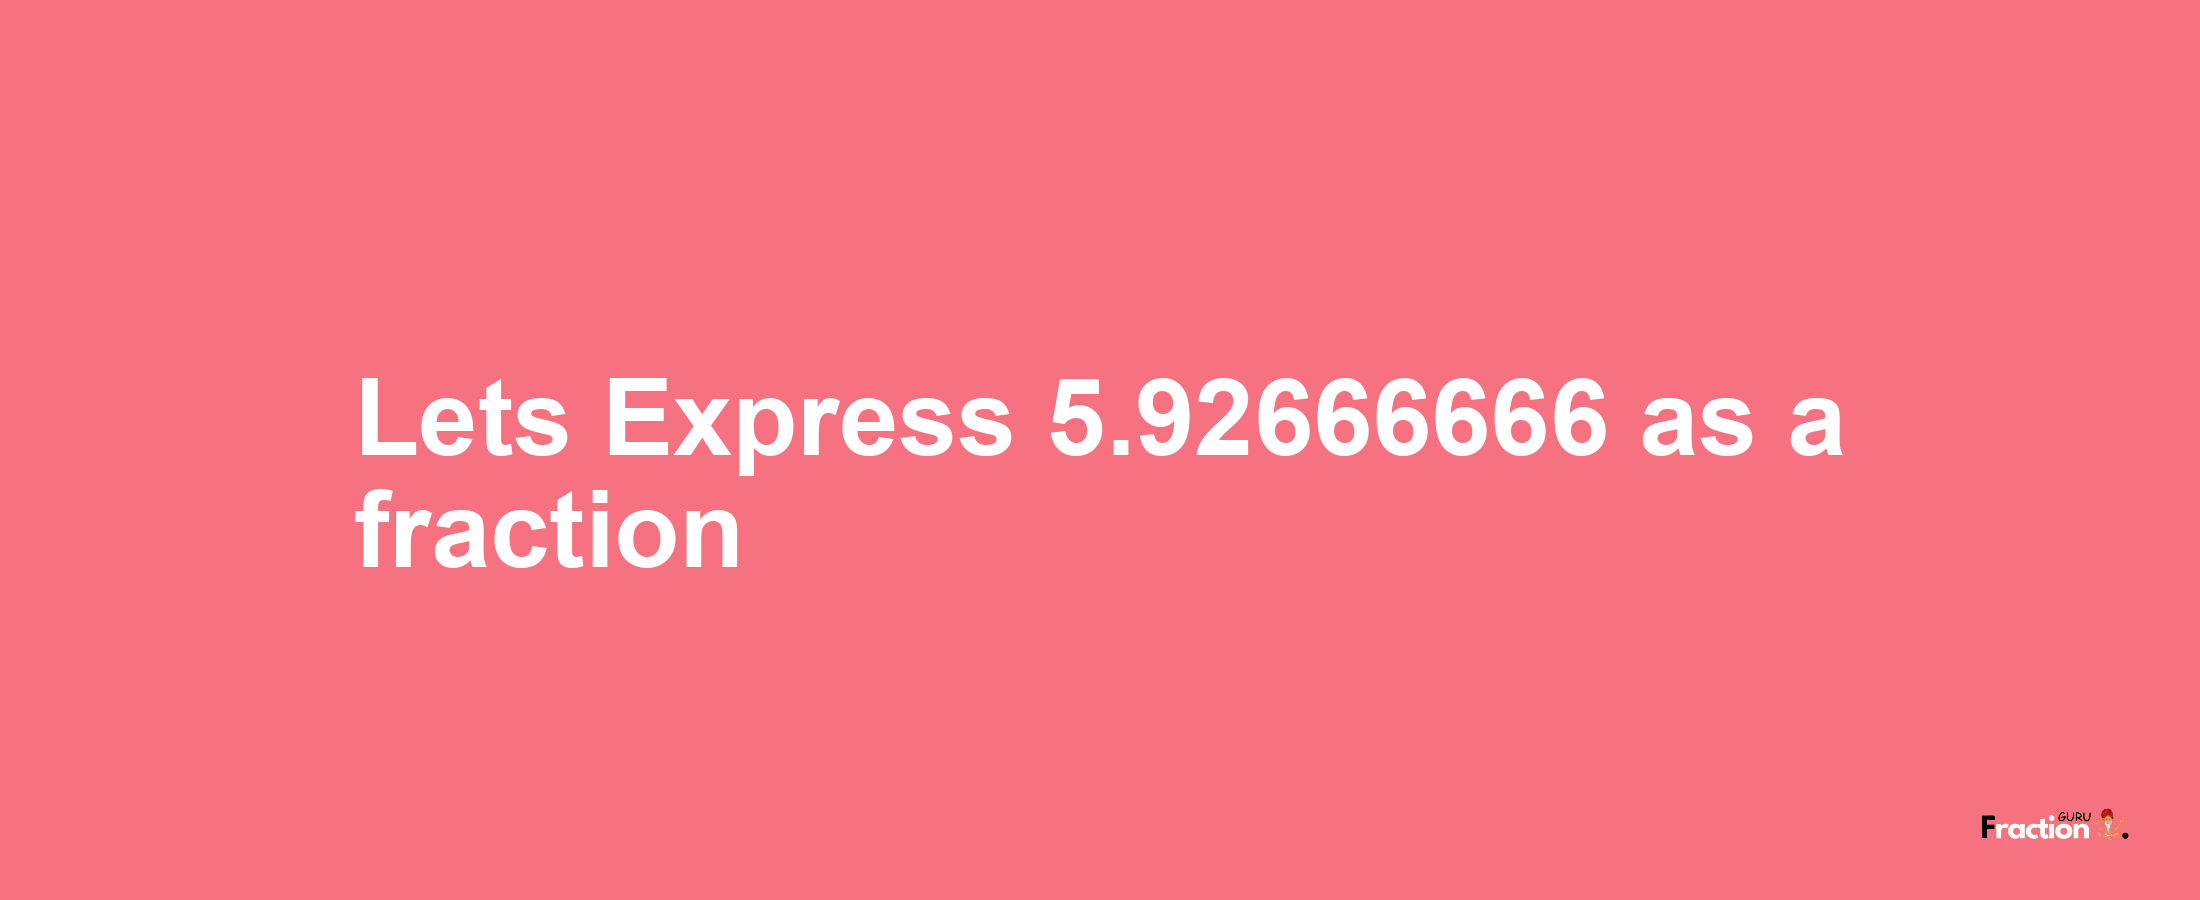 Lets Express 5.92666666 as afraction